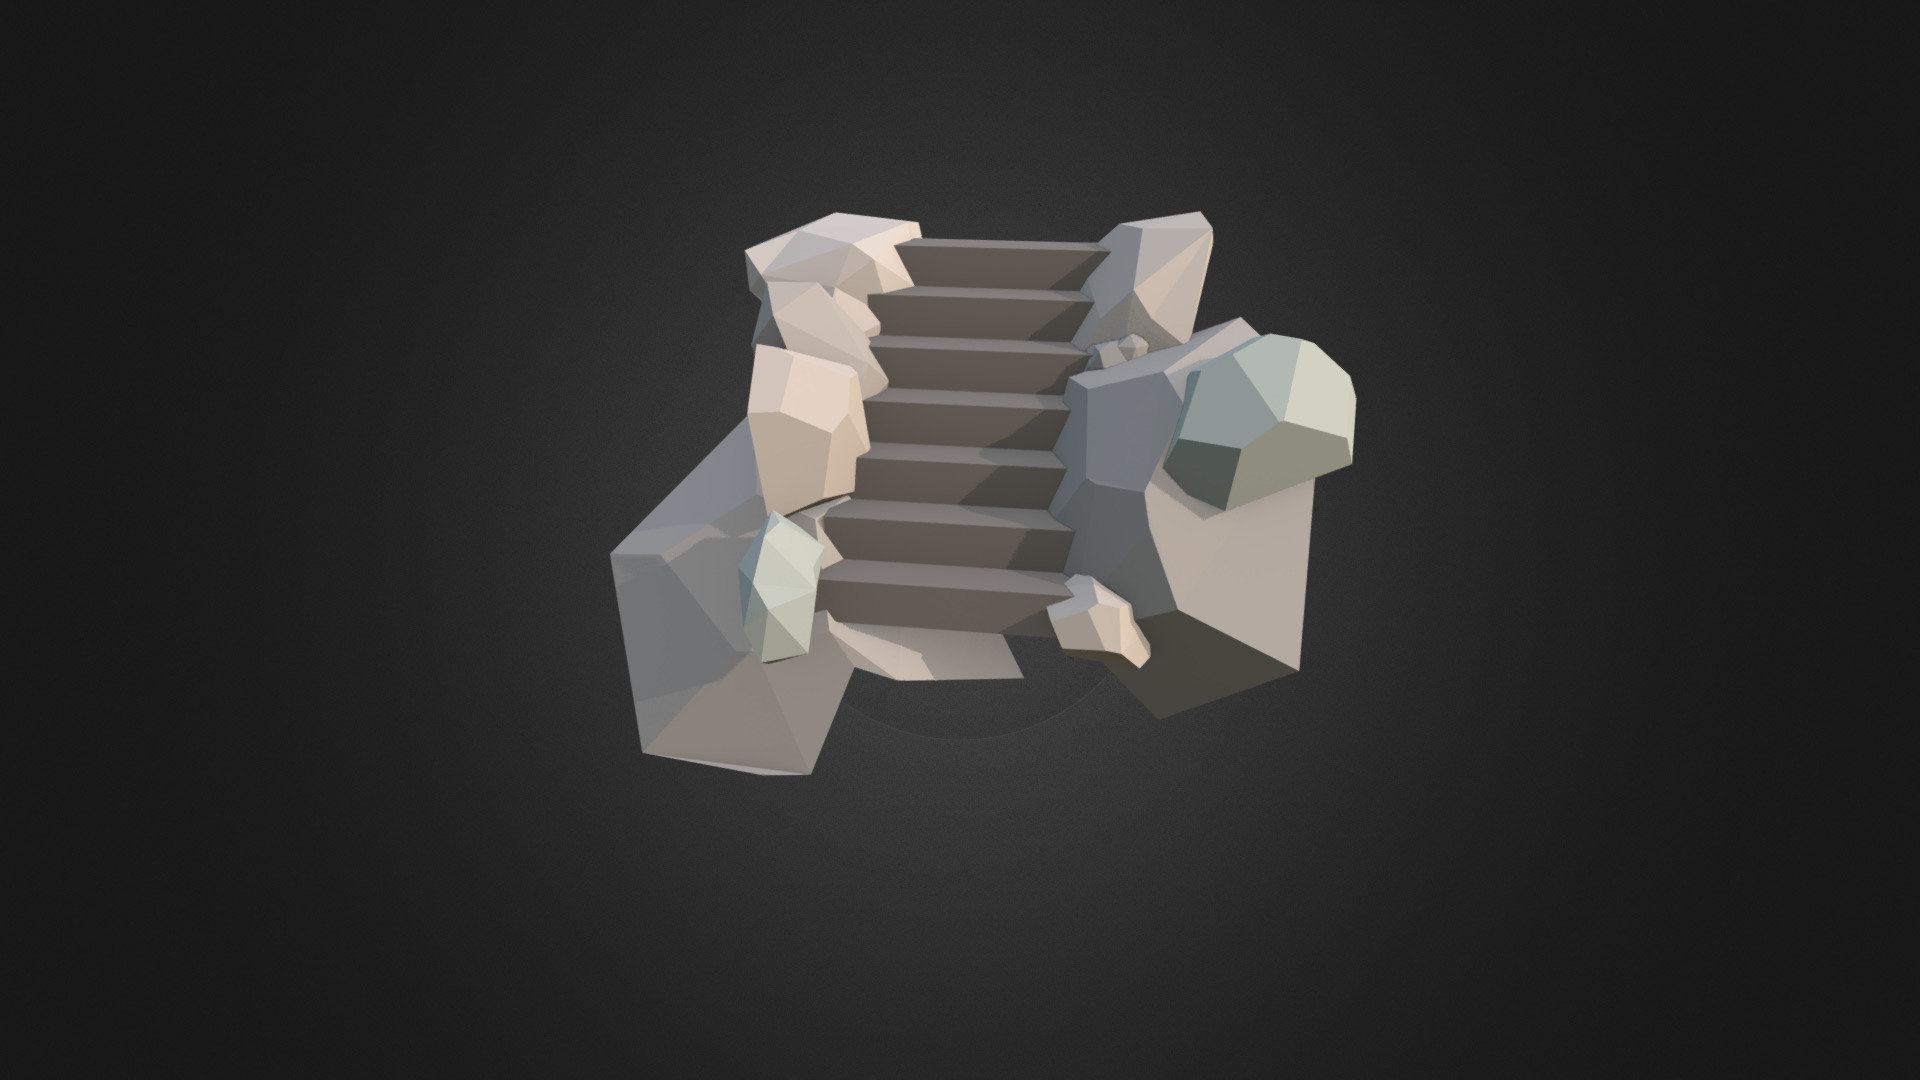 84 Steep Stairs Made Natural Stone Images, Stock Photos, 3D objects, &  Vectors